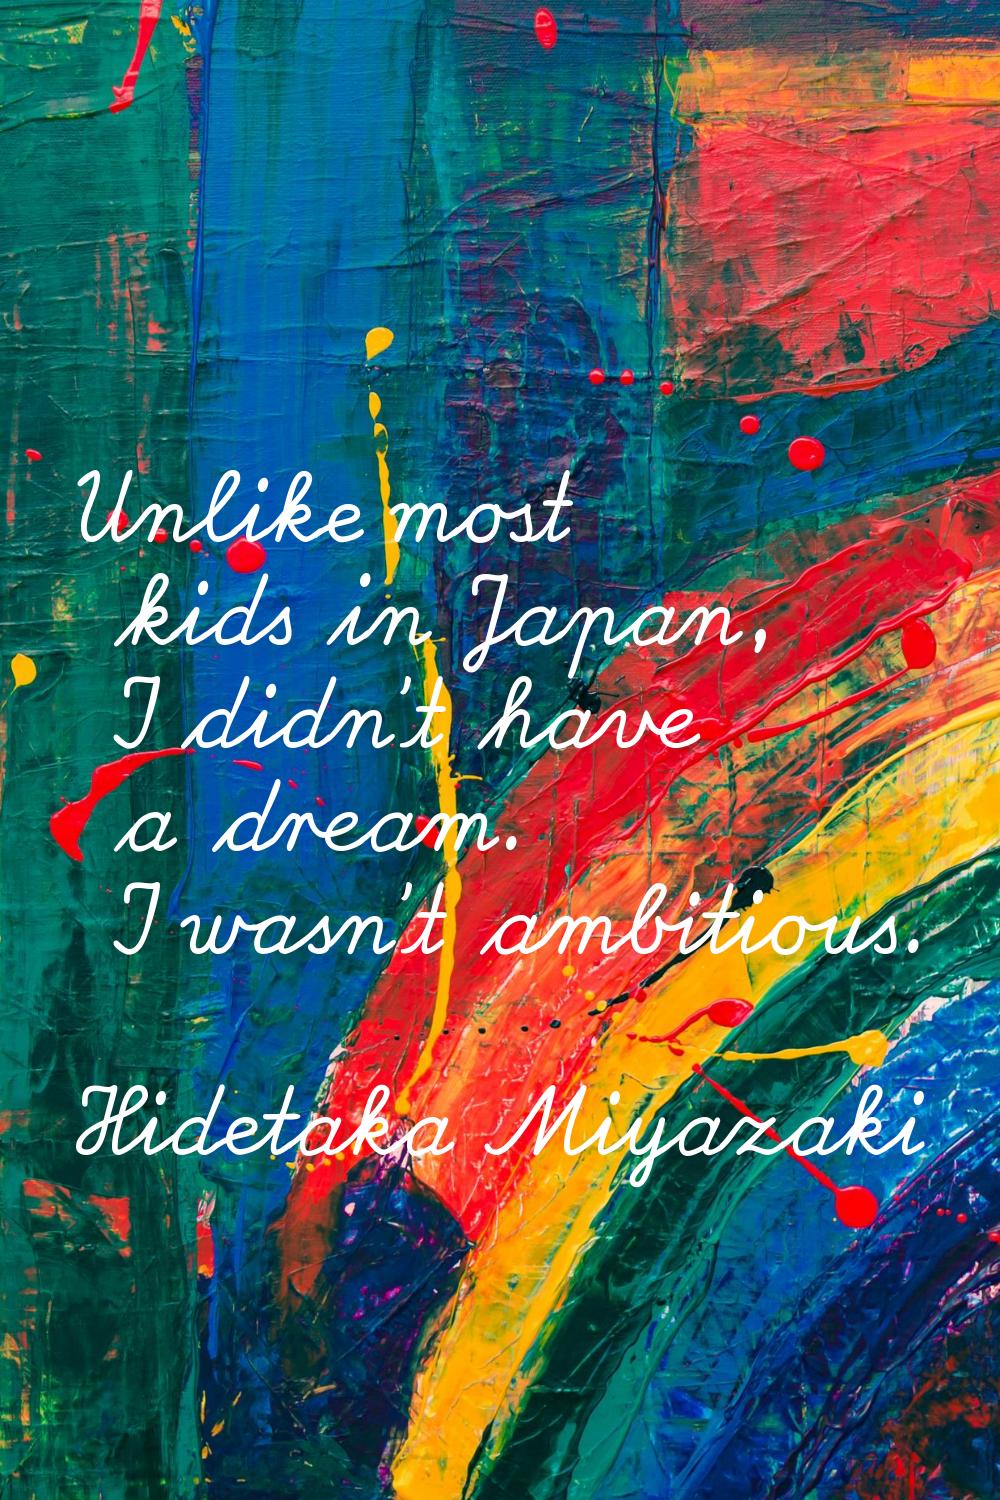 Unlike most kids in Japan, I didn't have a dream. I wasn't ambitious.